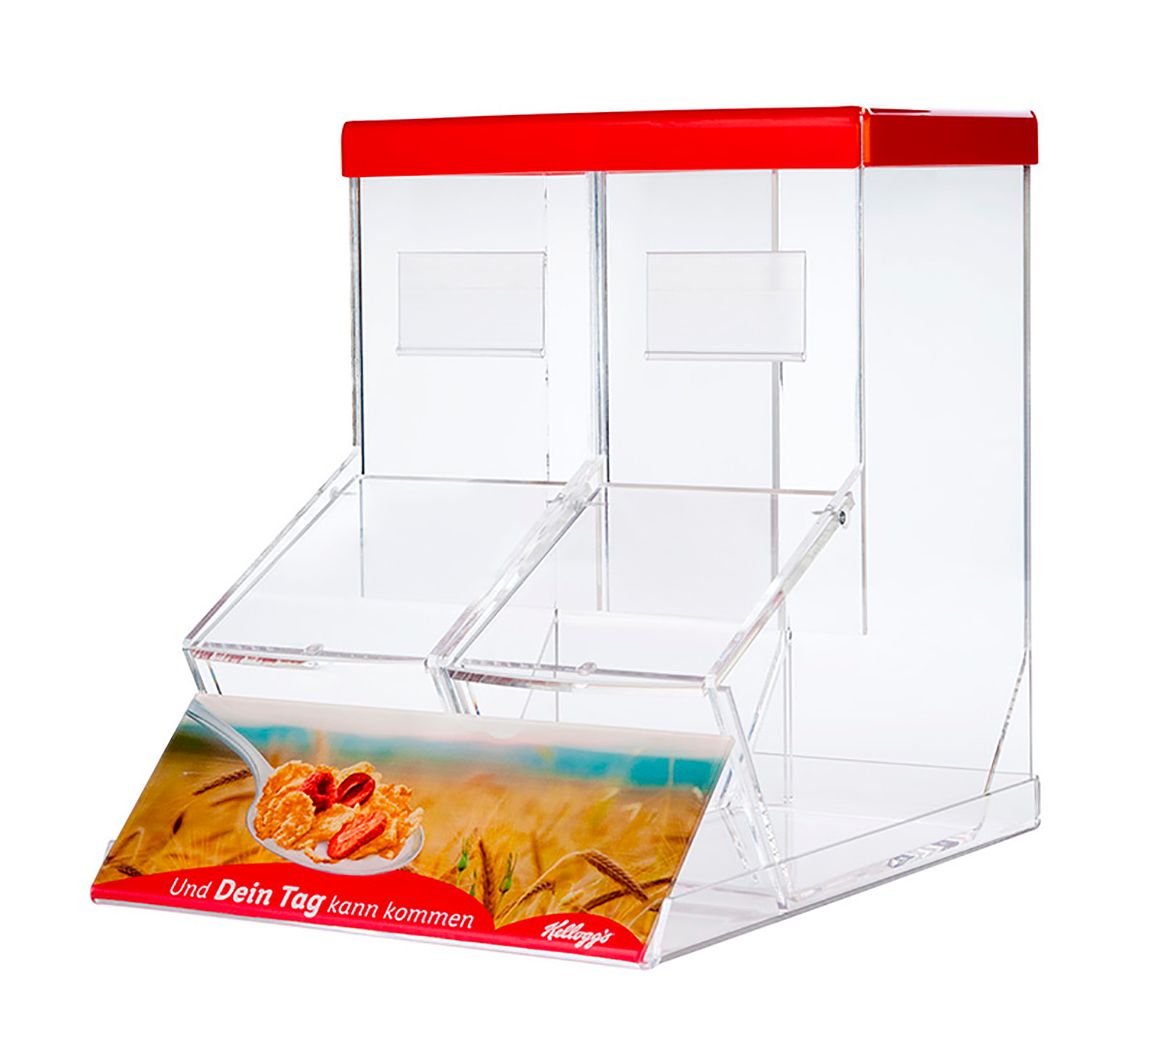 Product Display for Kellogs